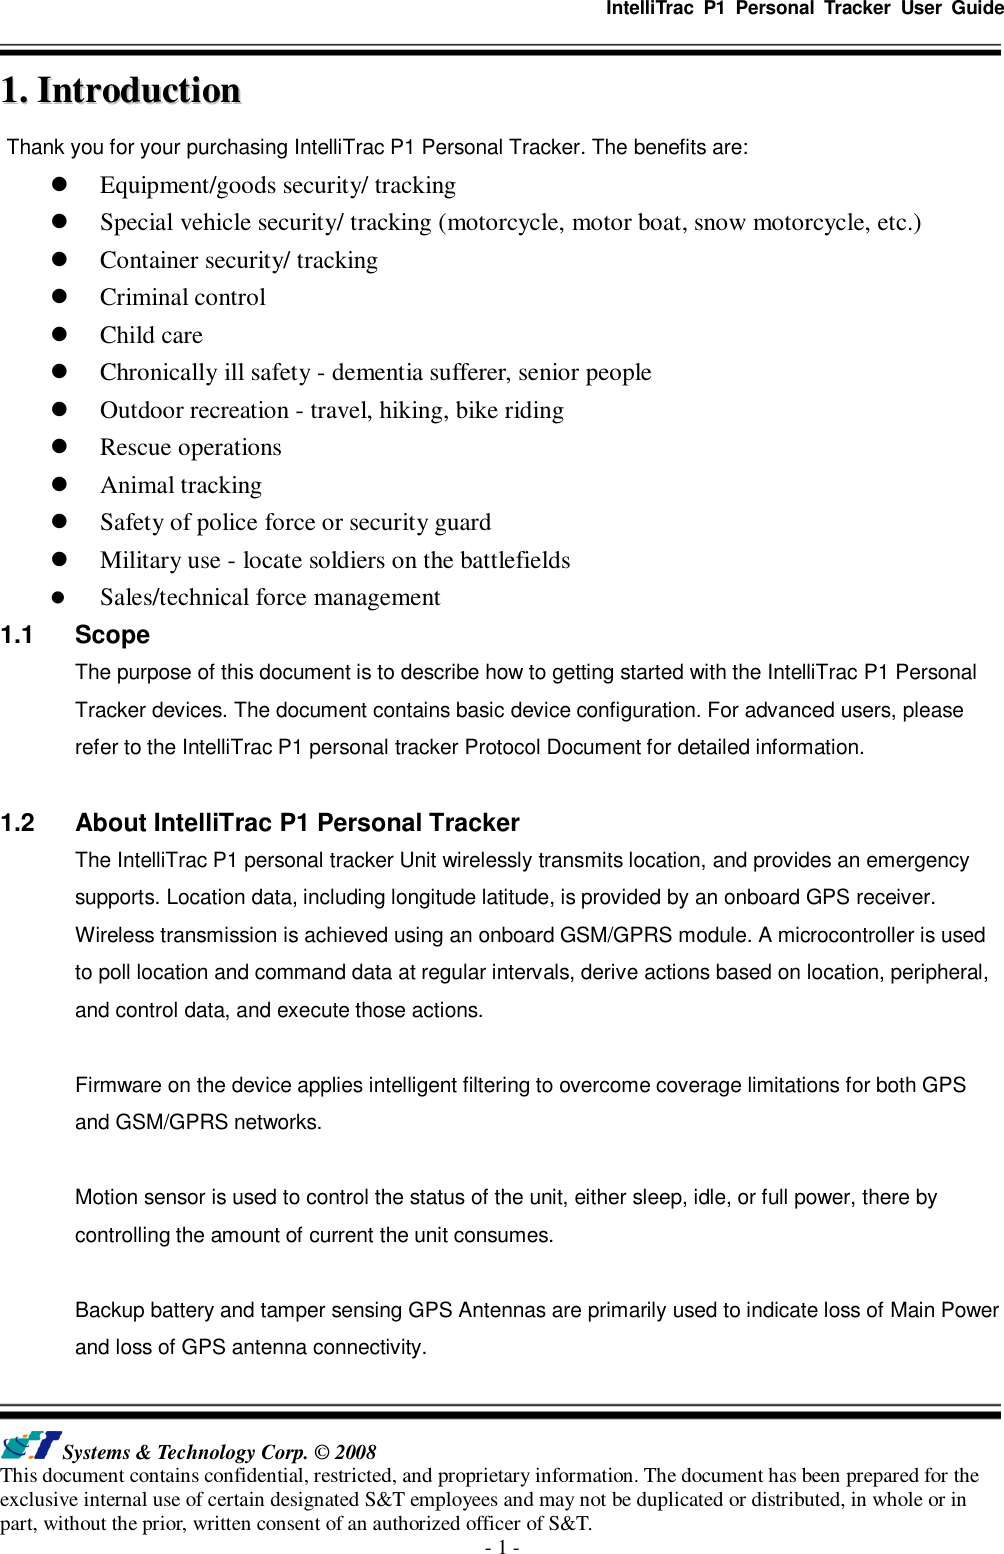   IntelliTrac  P1  Personal  Tracker  User  Guide   Systems &amp; Technology Corp. © 2008 This document contains confidential, restricted, and proprietary information. The document has been prepared for the exclusive internal use of certain designated S&amp;T employees and may not be duplicated or distributed, in whole or in part, without the prior, written consent of an authorized officer of S&amp;T. - 1 - 11..  IInnttrroodduuccttiioonn  Thank you for your purchasing IntelliTrac P1 Personal Tracker. The benefits are:  Equipment/goods security/ tracking  Special vehicle security/ tracking (motorcycle, motor boat, snow motorcycle, etc.)  Container security/ tracking  Criminal control  Child care  Chronically ill safety - dementia sufferer, senior people  Outdoor recreation - travel, hiking, bike riding  Rescue operations  Animal tracking  Safety of police force or security guard  Military use - locate soldiers on the battlefields  Sales/technical force management 1.1  Scope The purpose of this document is to describe how to getting started with the IntelliTrac P1 Personal Tracker devices. The document contains basic device configuration. For advanced users, please refer to the IntelliTrac P1 personal tracker Protocol Document for detailed information.  1.2  About IntelliTrac P1 Personal Tracker The IntelliTrac P1 personal tracker Unit wirelessly transmits location, and provides an emergency supports. Location data, including longitude latitude, is provided by an onboard GPS receiver. Wireless transmission is achieved using an onboard GSM/GPRS module. A microcontroller is used to poll location and command data at regular intervals, derive actions based on location, peripheral, and control data, and execute those actions.  Firmware on the device applies intelligent filtering to overcome coverage limitations for both GPS and GSM/GPRS networks.    Motion sensor is used to control the status of the unit, either sleep, idle, or full power, there by controlling the amount of current the unit consumes.  Backup battery and tamper sensing GPS Antennas are primarily used to indicate loss of Main Power and loss of GPS antenna connectivity. 